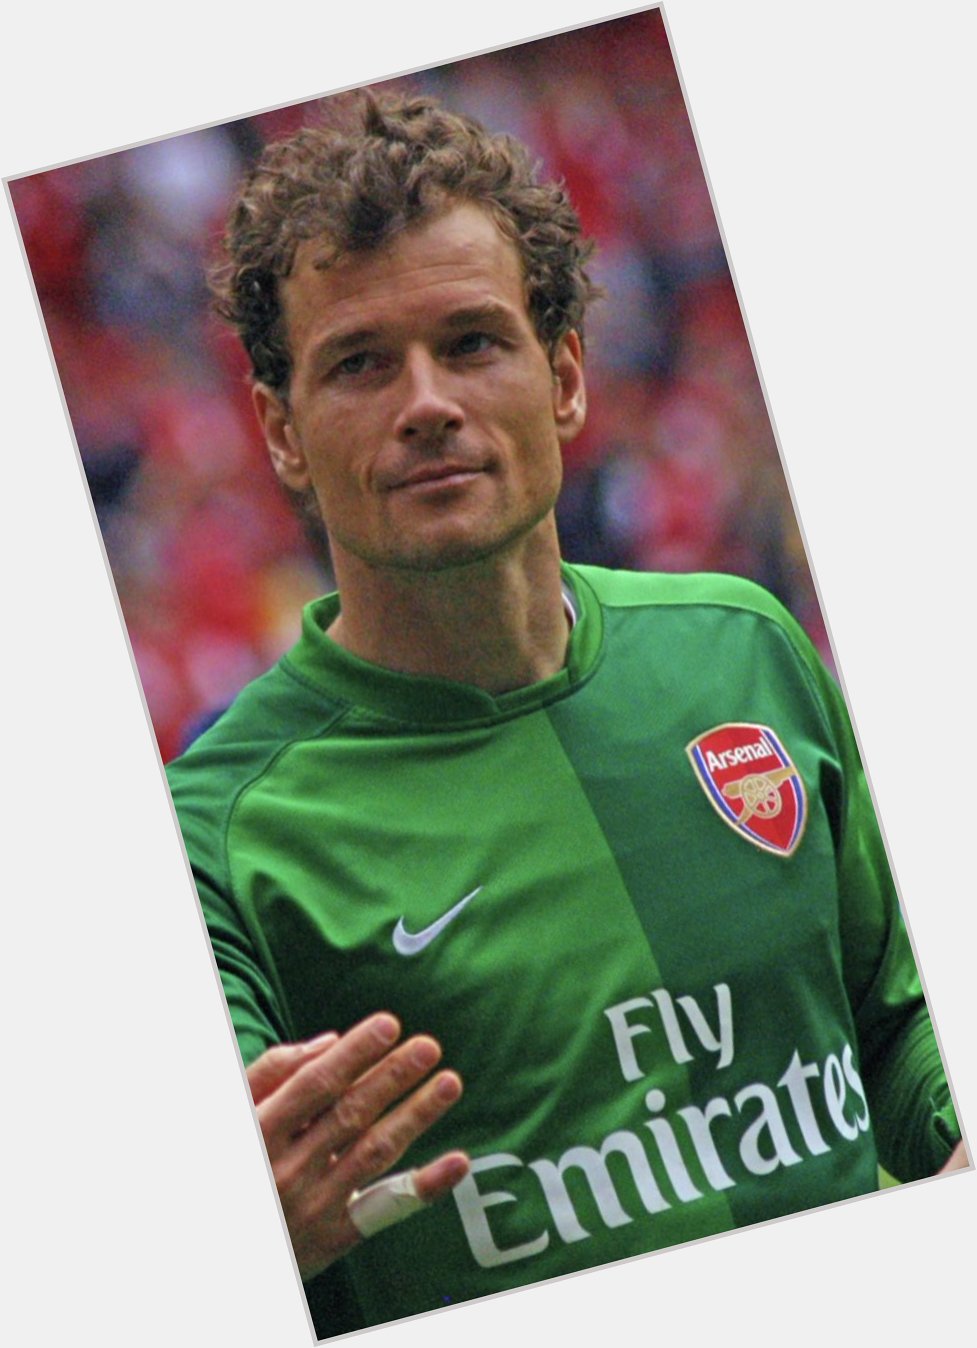 Happy birthday to our invincible goalkeeper Jens Lehmann 